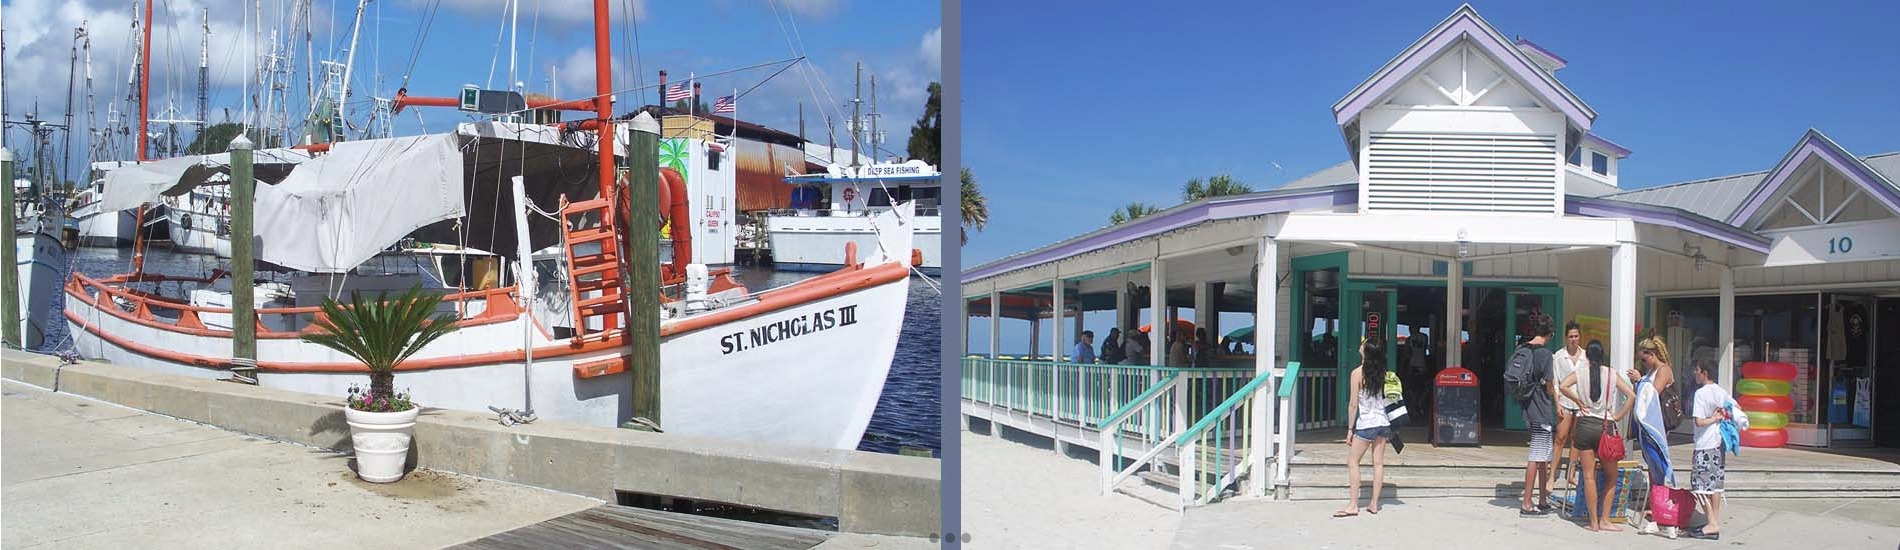 picture of boat on left and people outside a beach restaurant